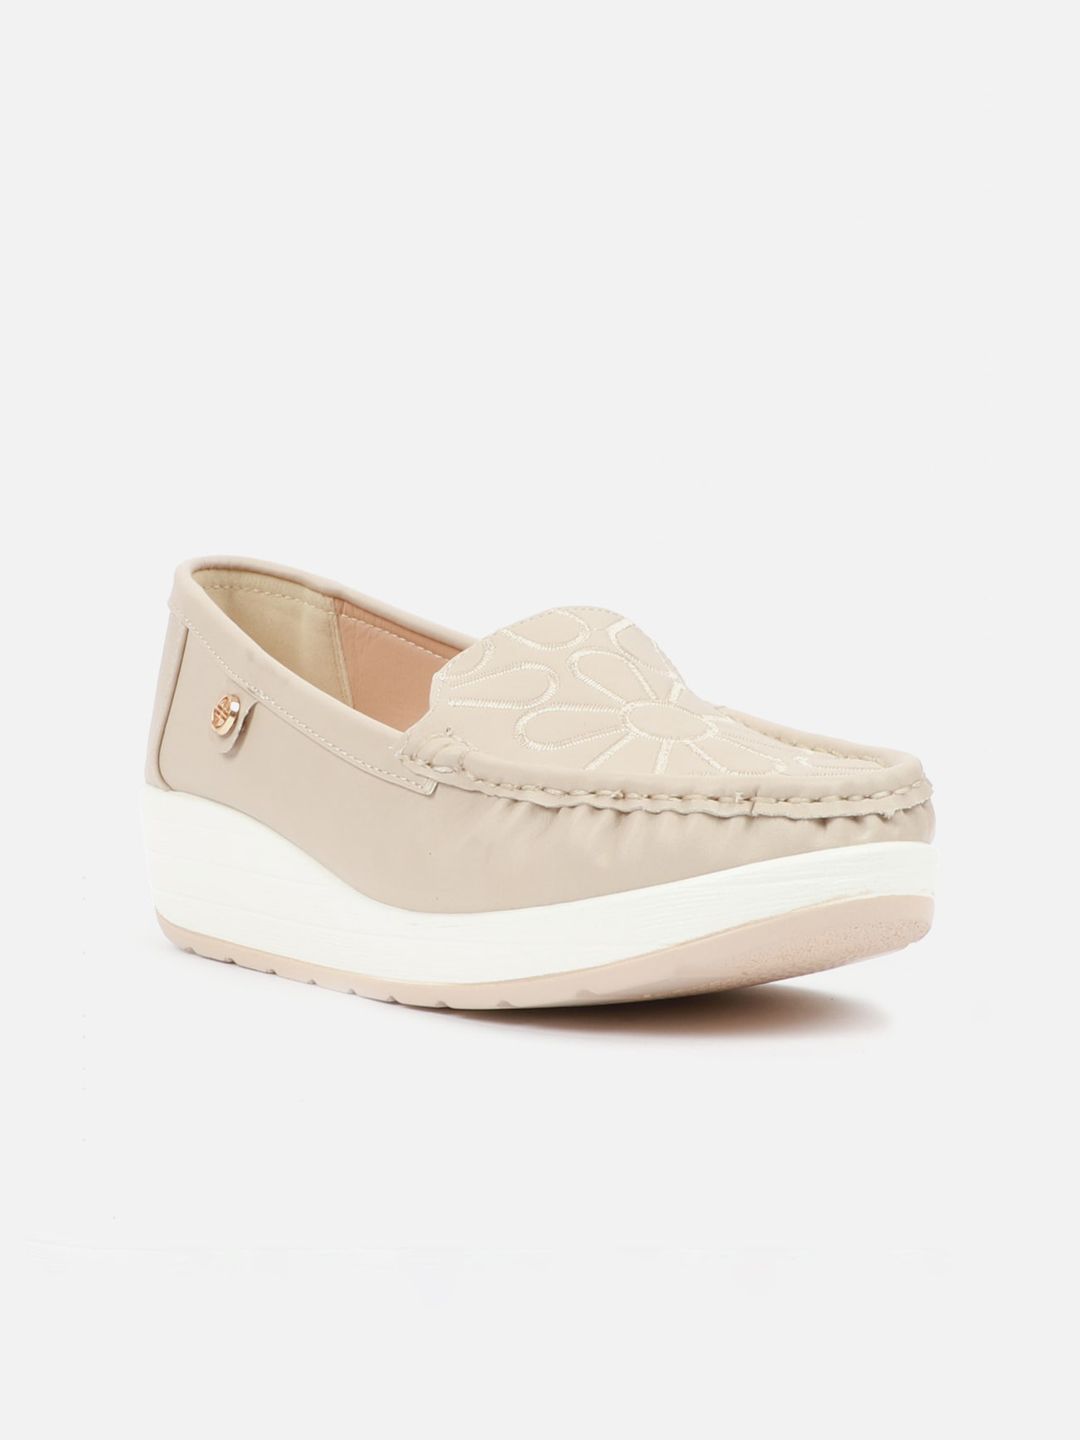 Carlton London Women Beige Driving Shoes Price in India